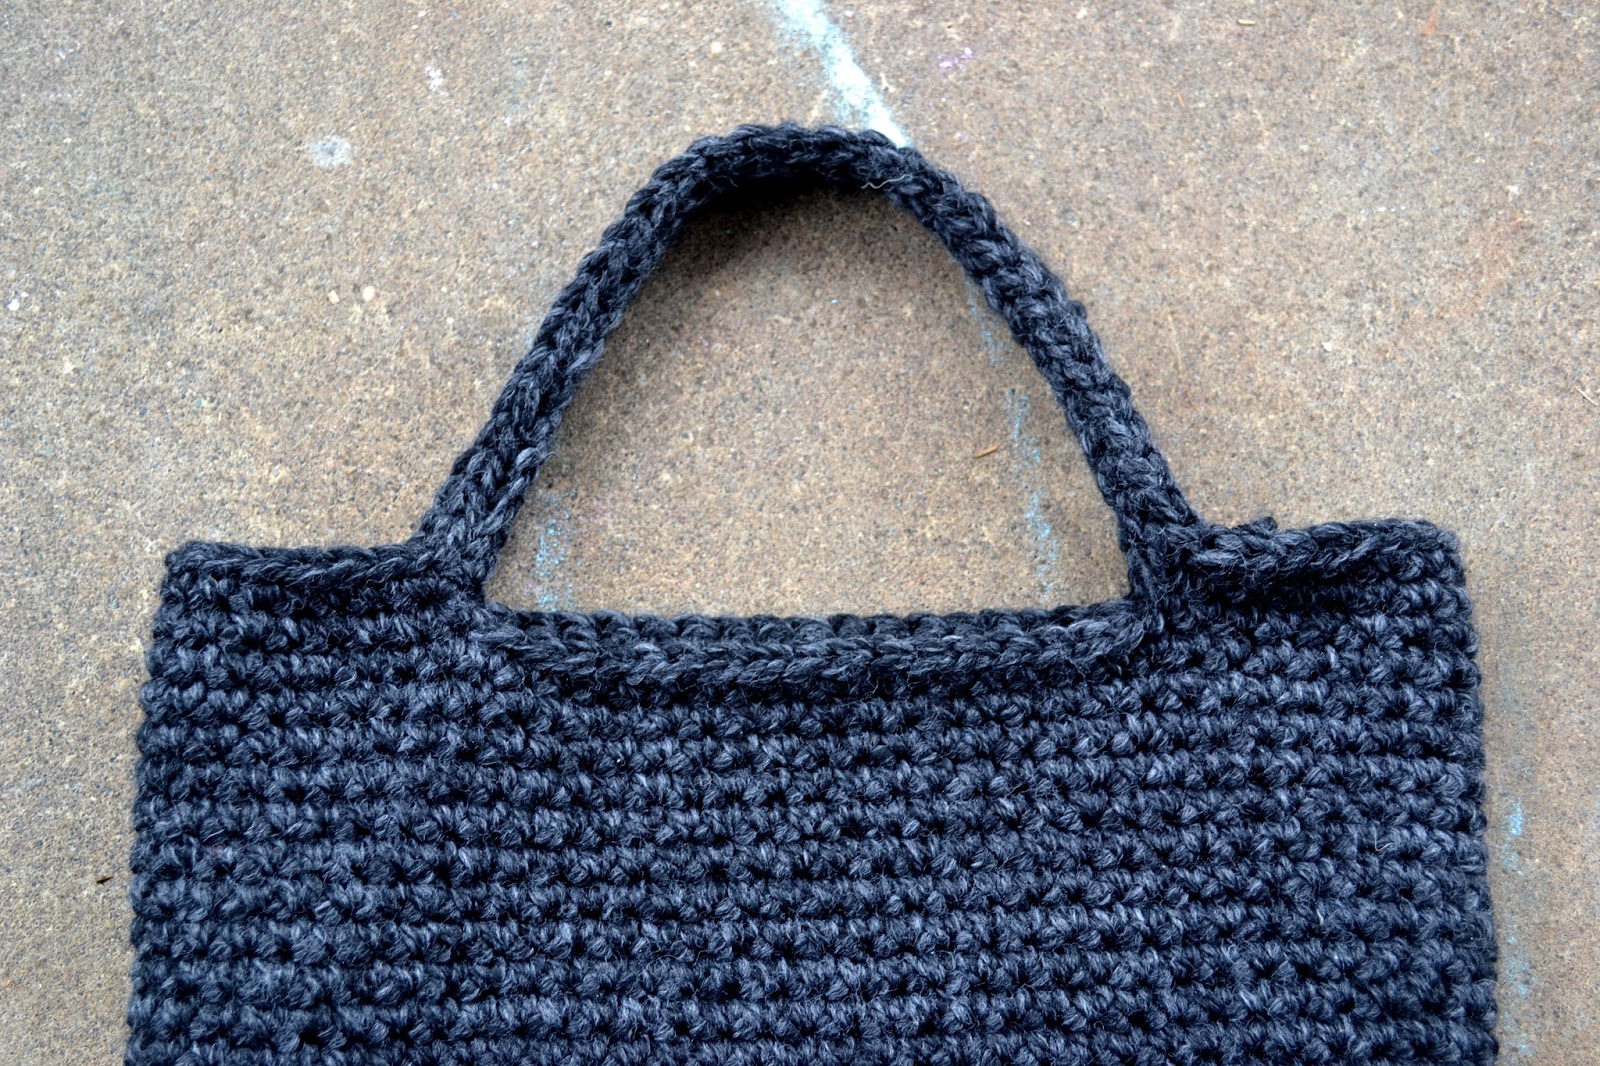 Crochet in Color: Chunky Crocheted Tote Pattern